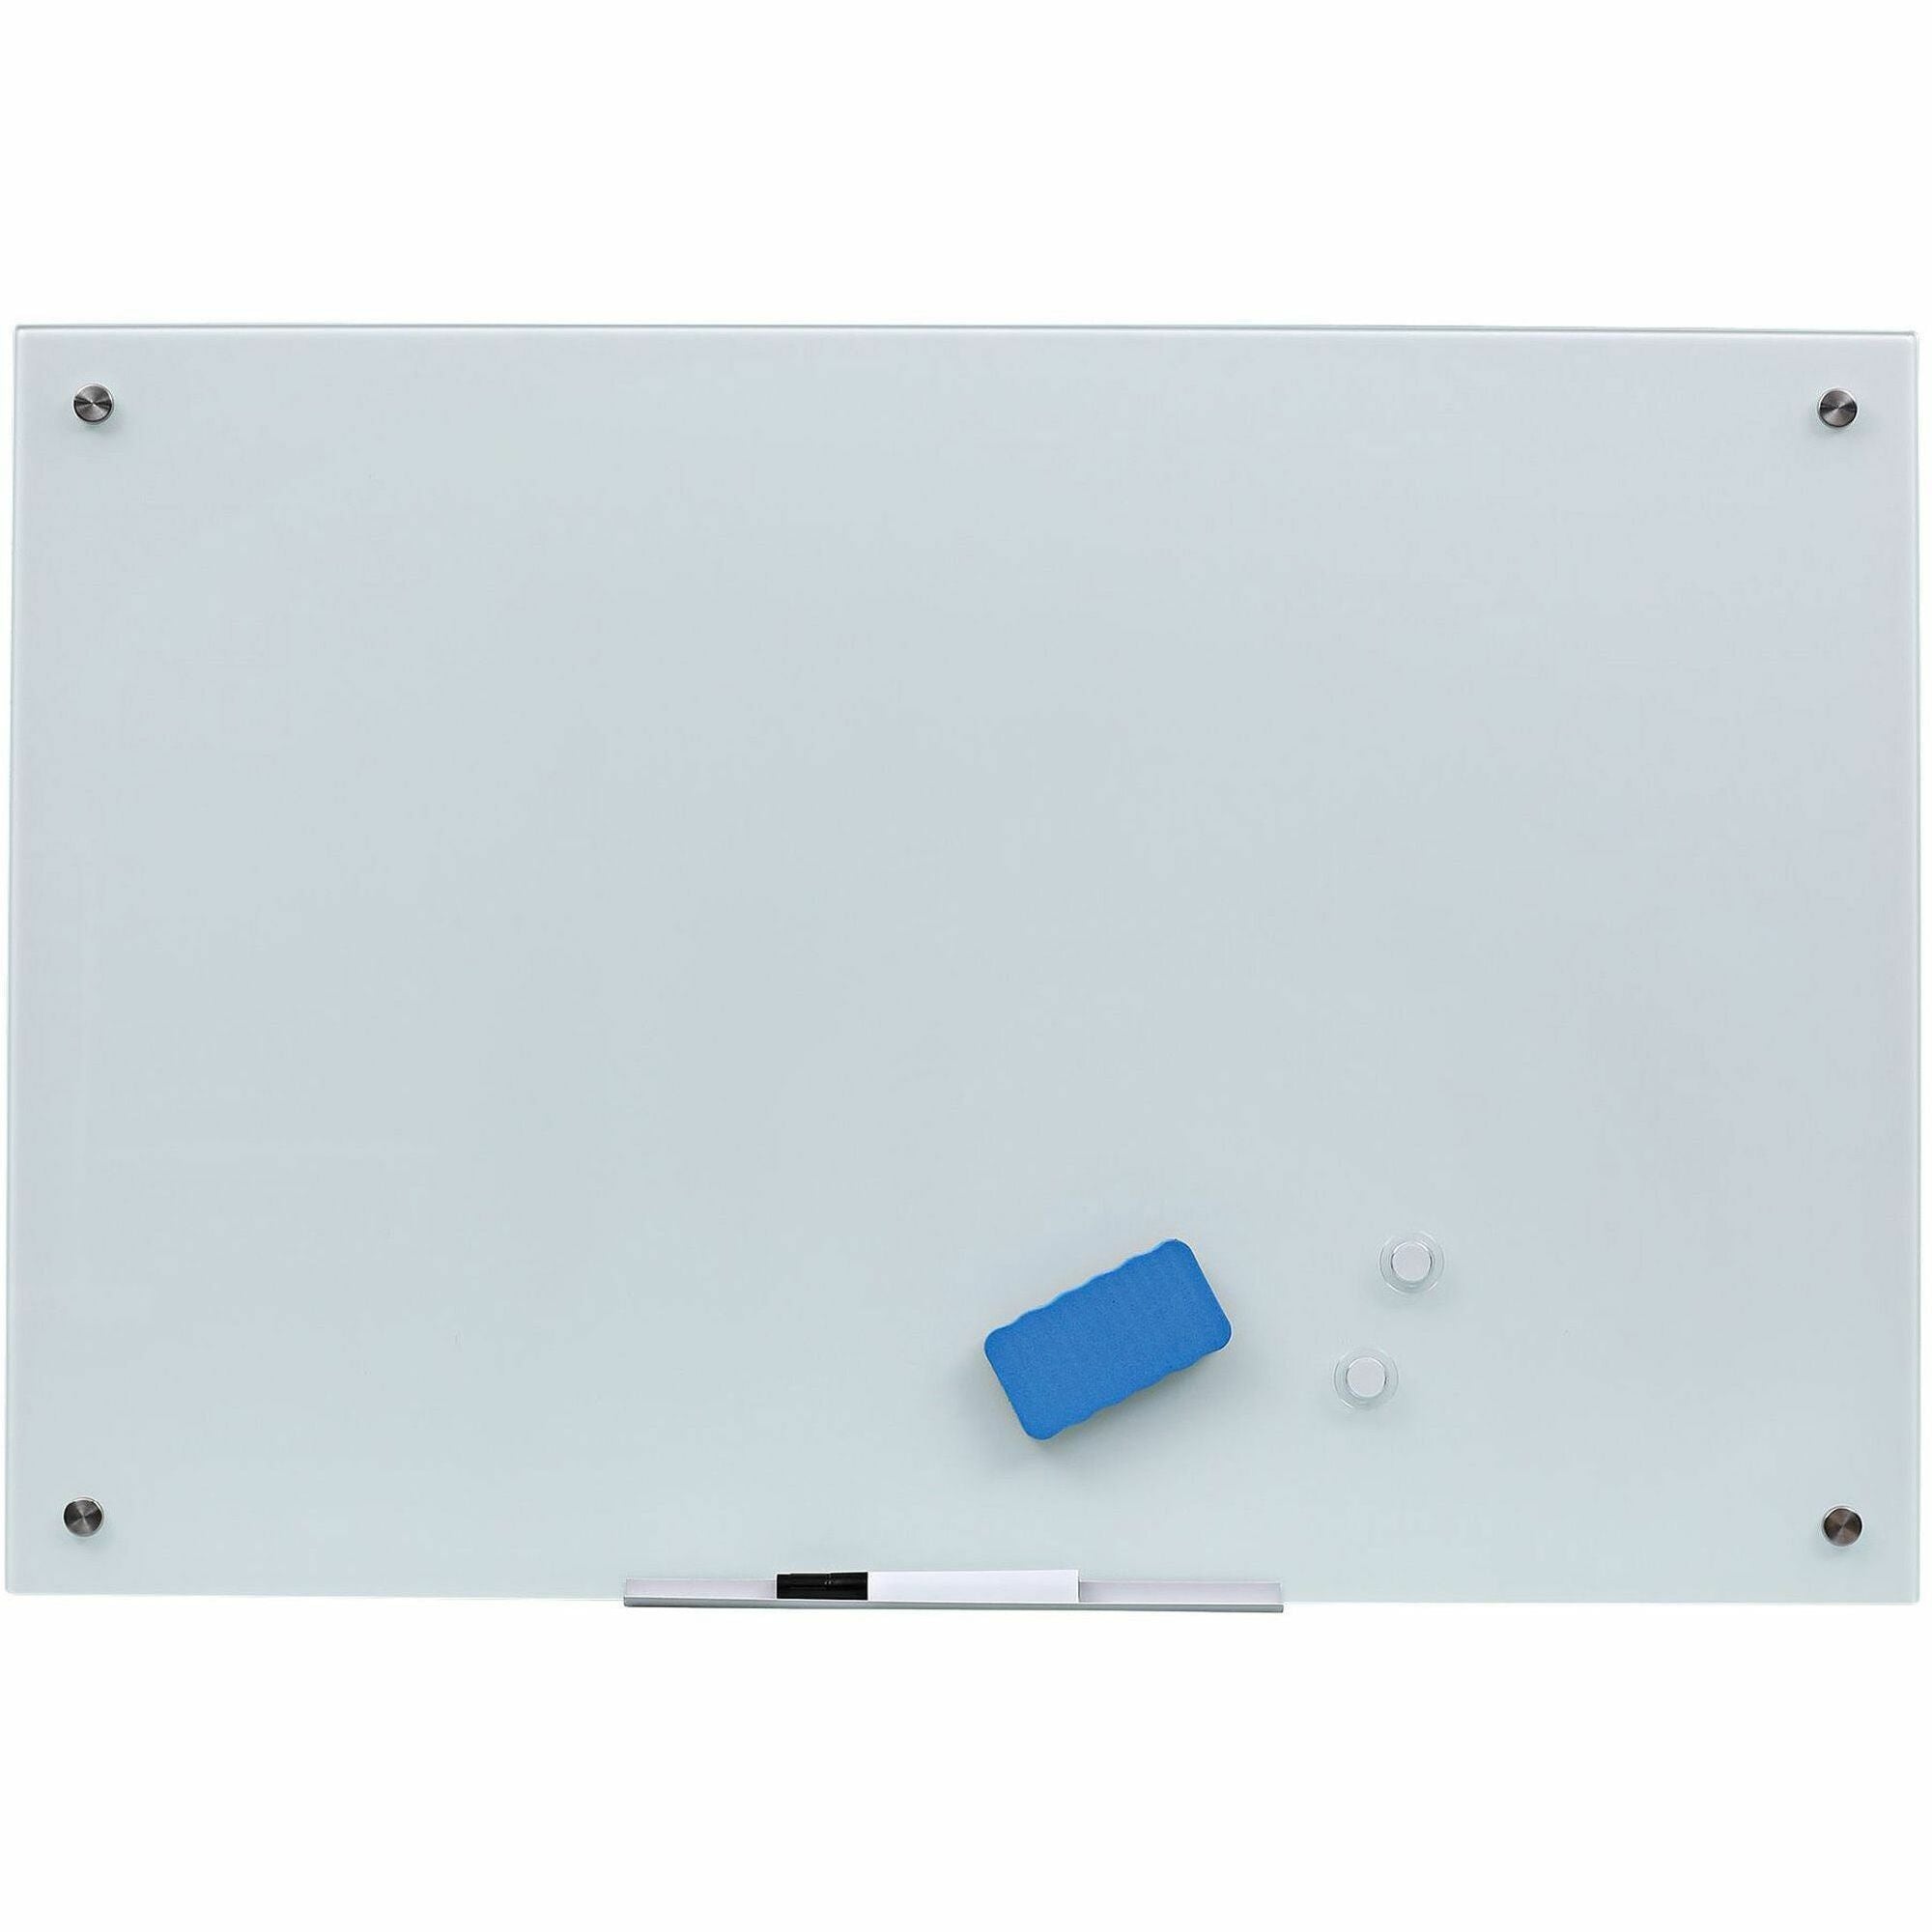 bi-silque-magnetic-glass-dry-erase-board-24-2-ft-width-x-36-3-ft-height-white-glass-surface-rectangle-horizontal-vertical-magnetic-1-each_bvcgl070107 - 1